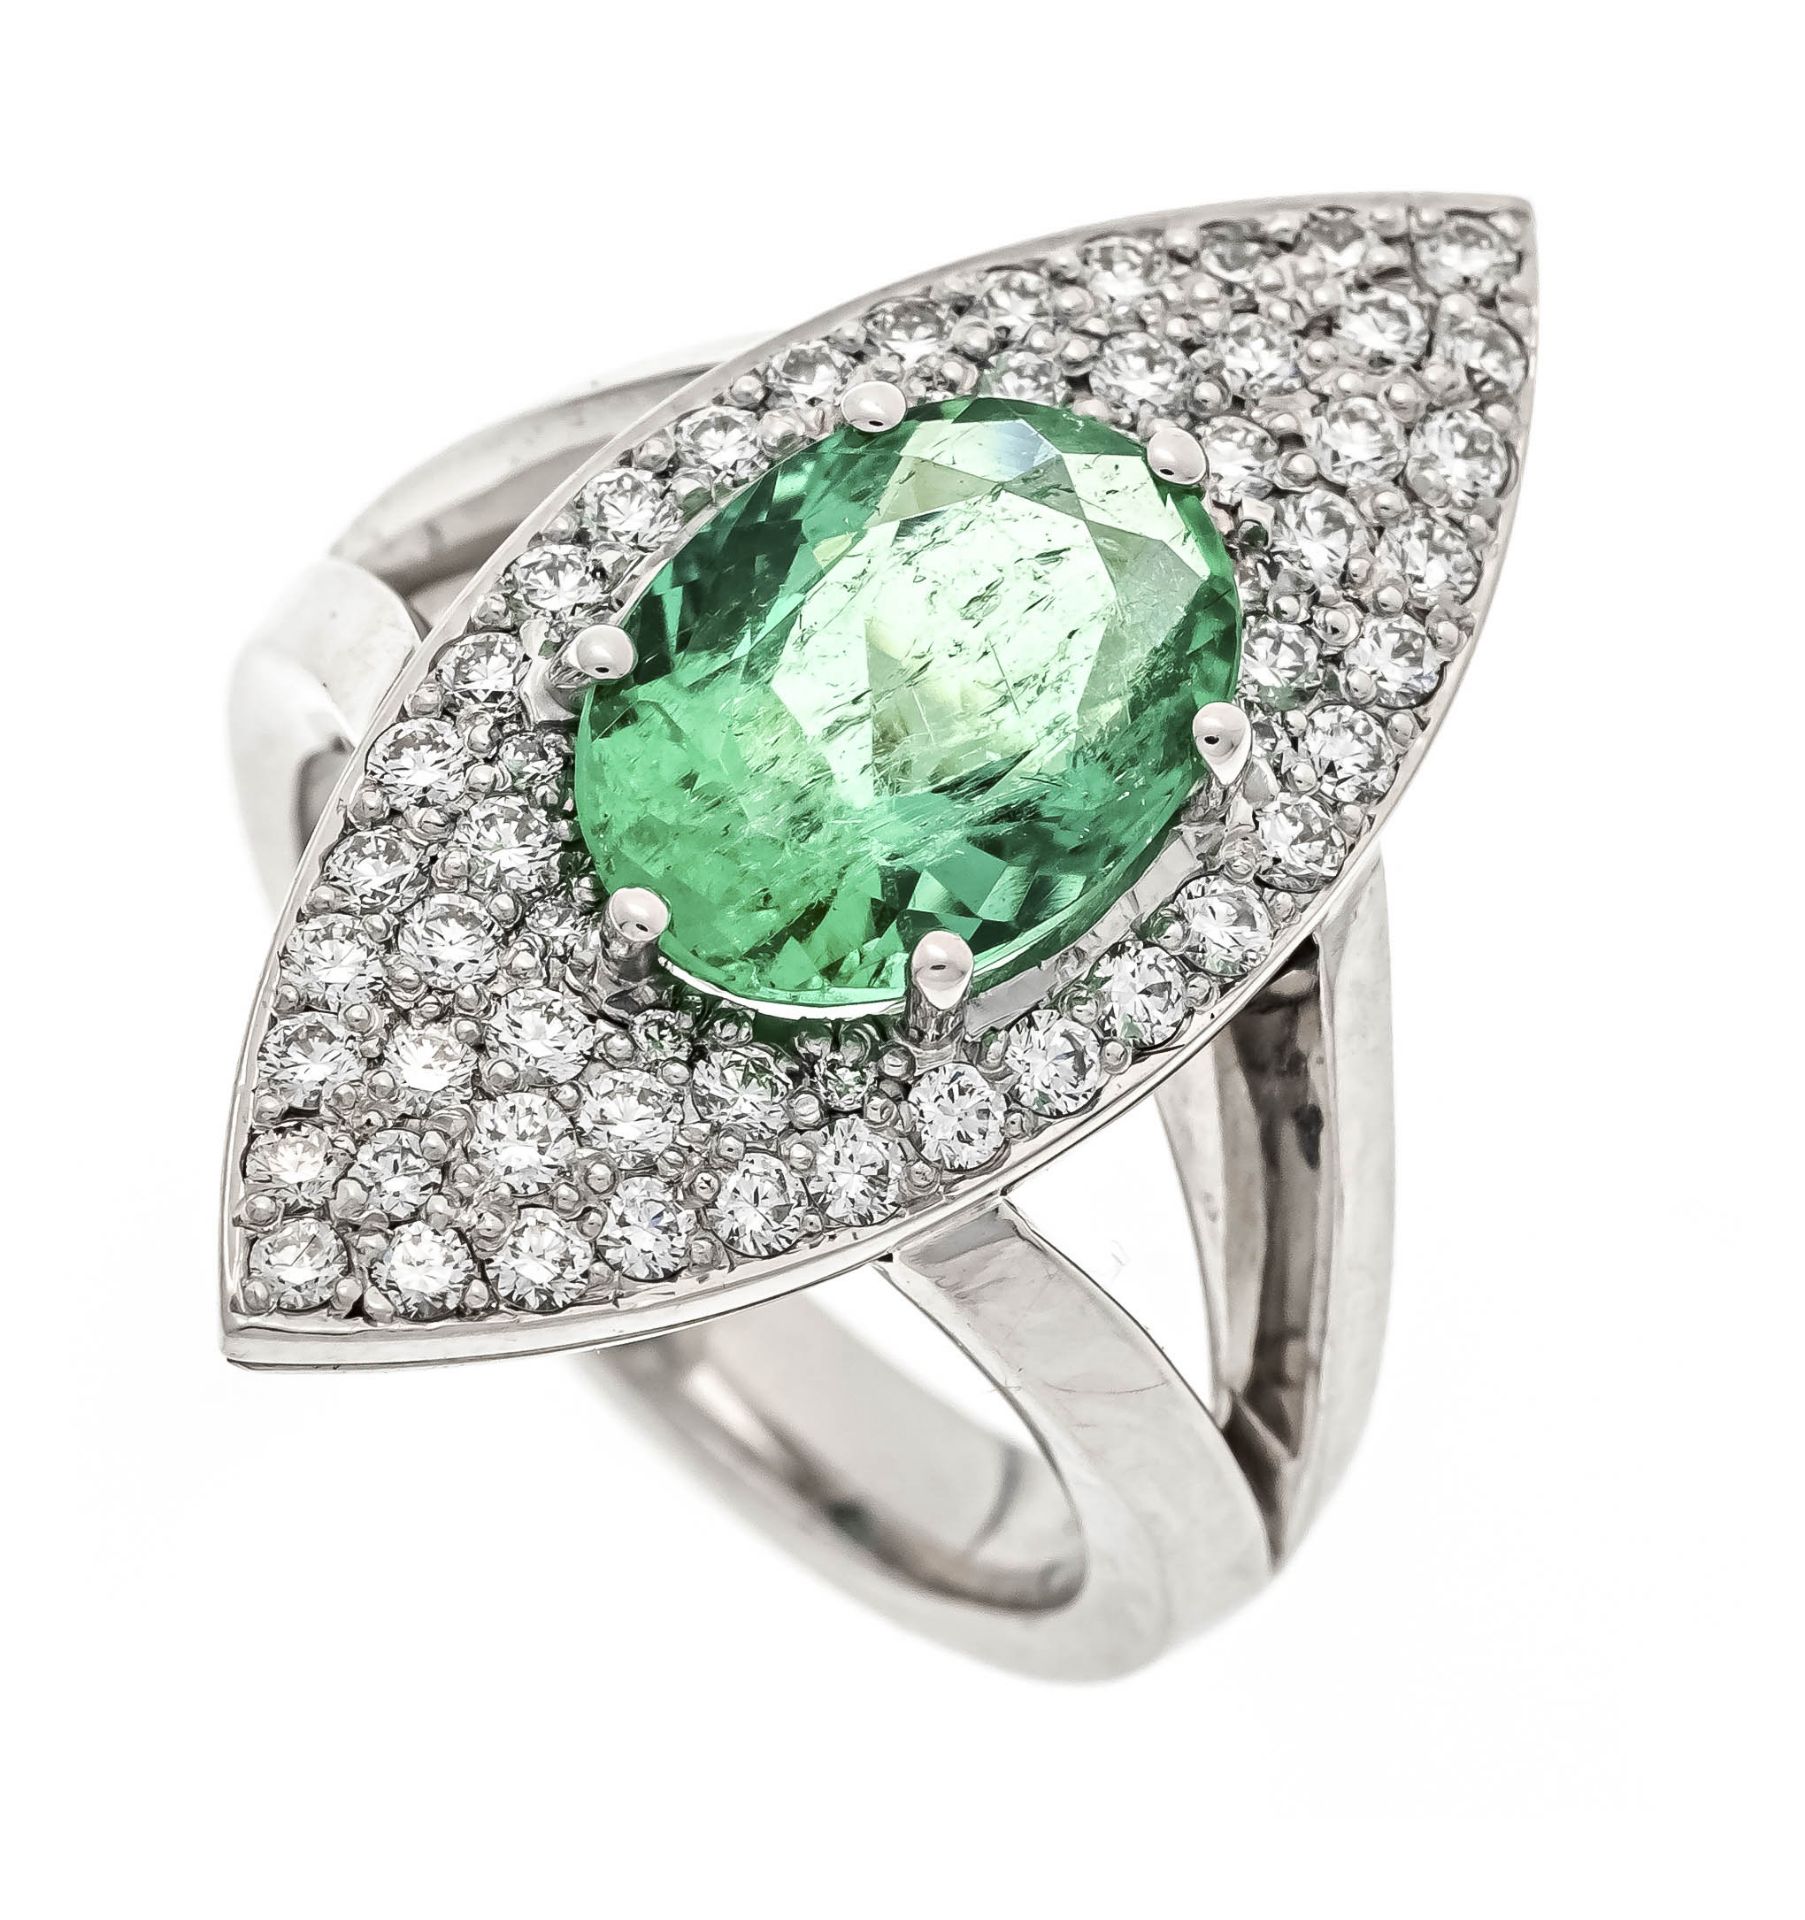 Emerald and brilliant-cut diamond boat-shaped ring, WG 750/000, with an excellent oval faceted